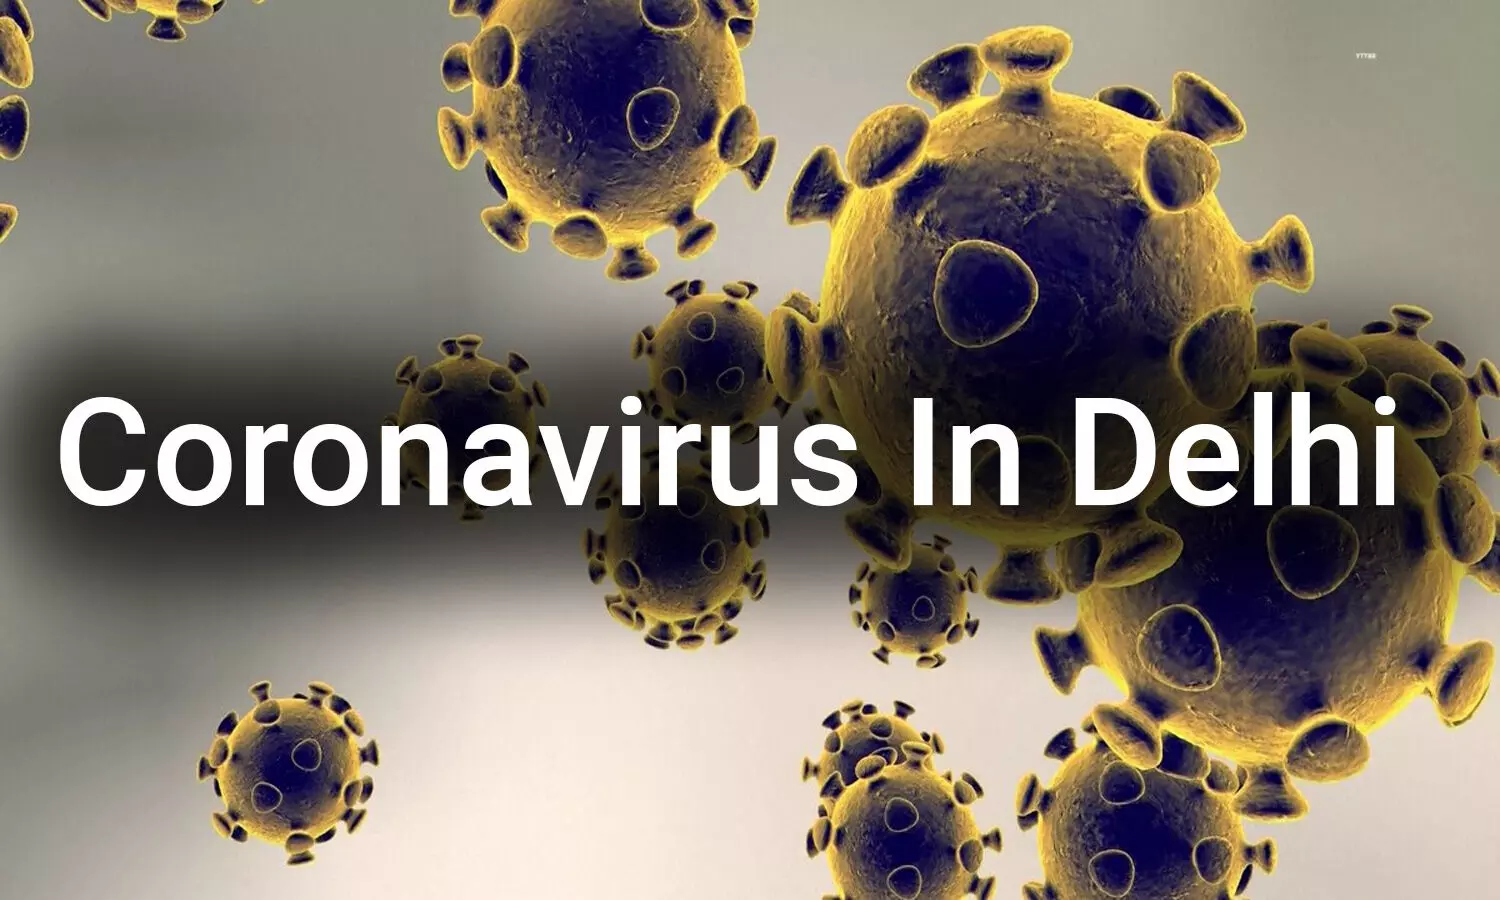 Coronavirus Update: Another case reported from Delhi, Kerala; one from Jammu and one from UP